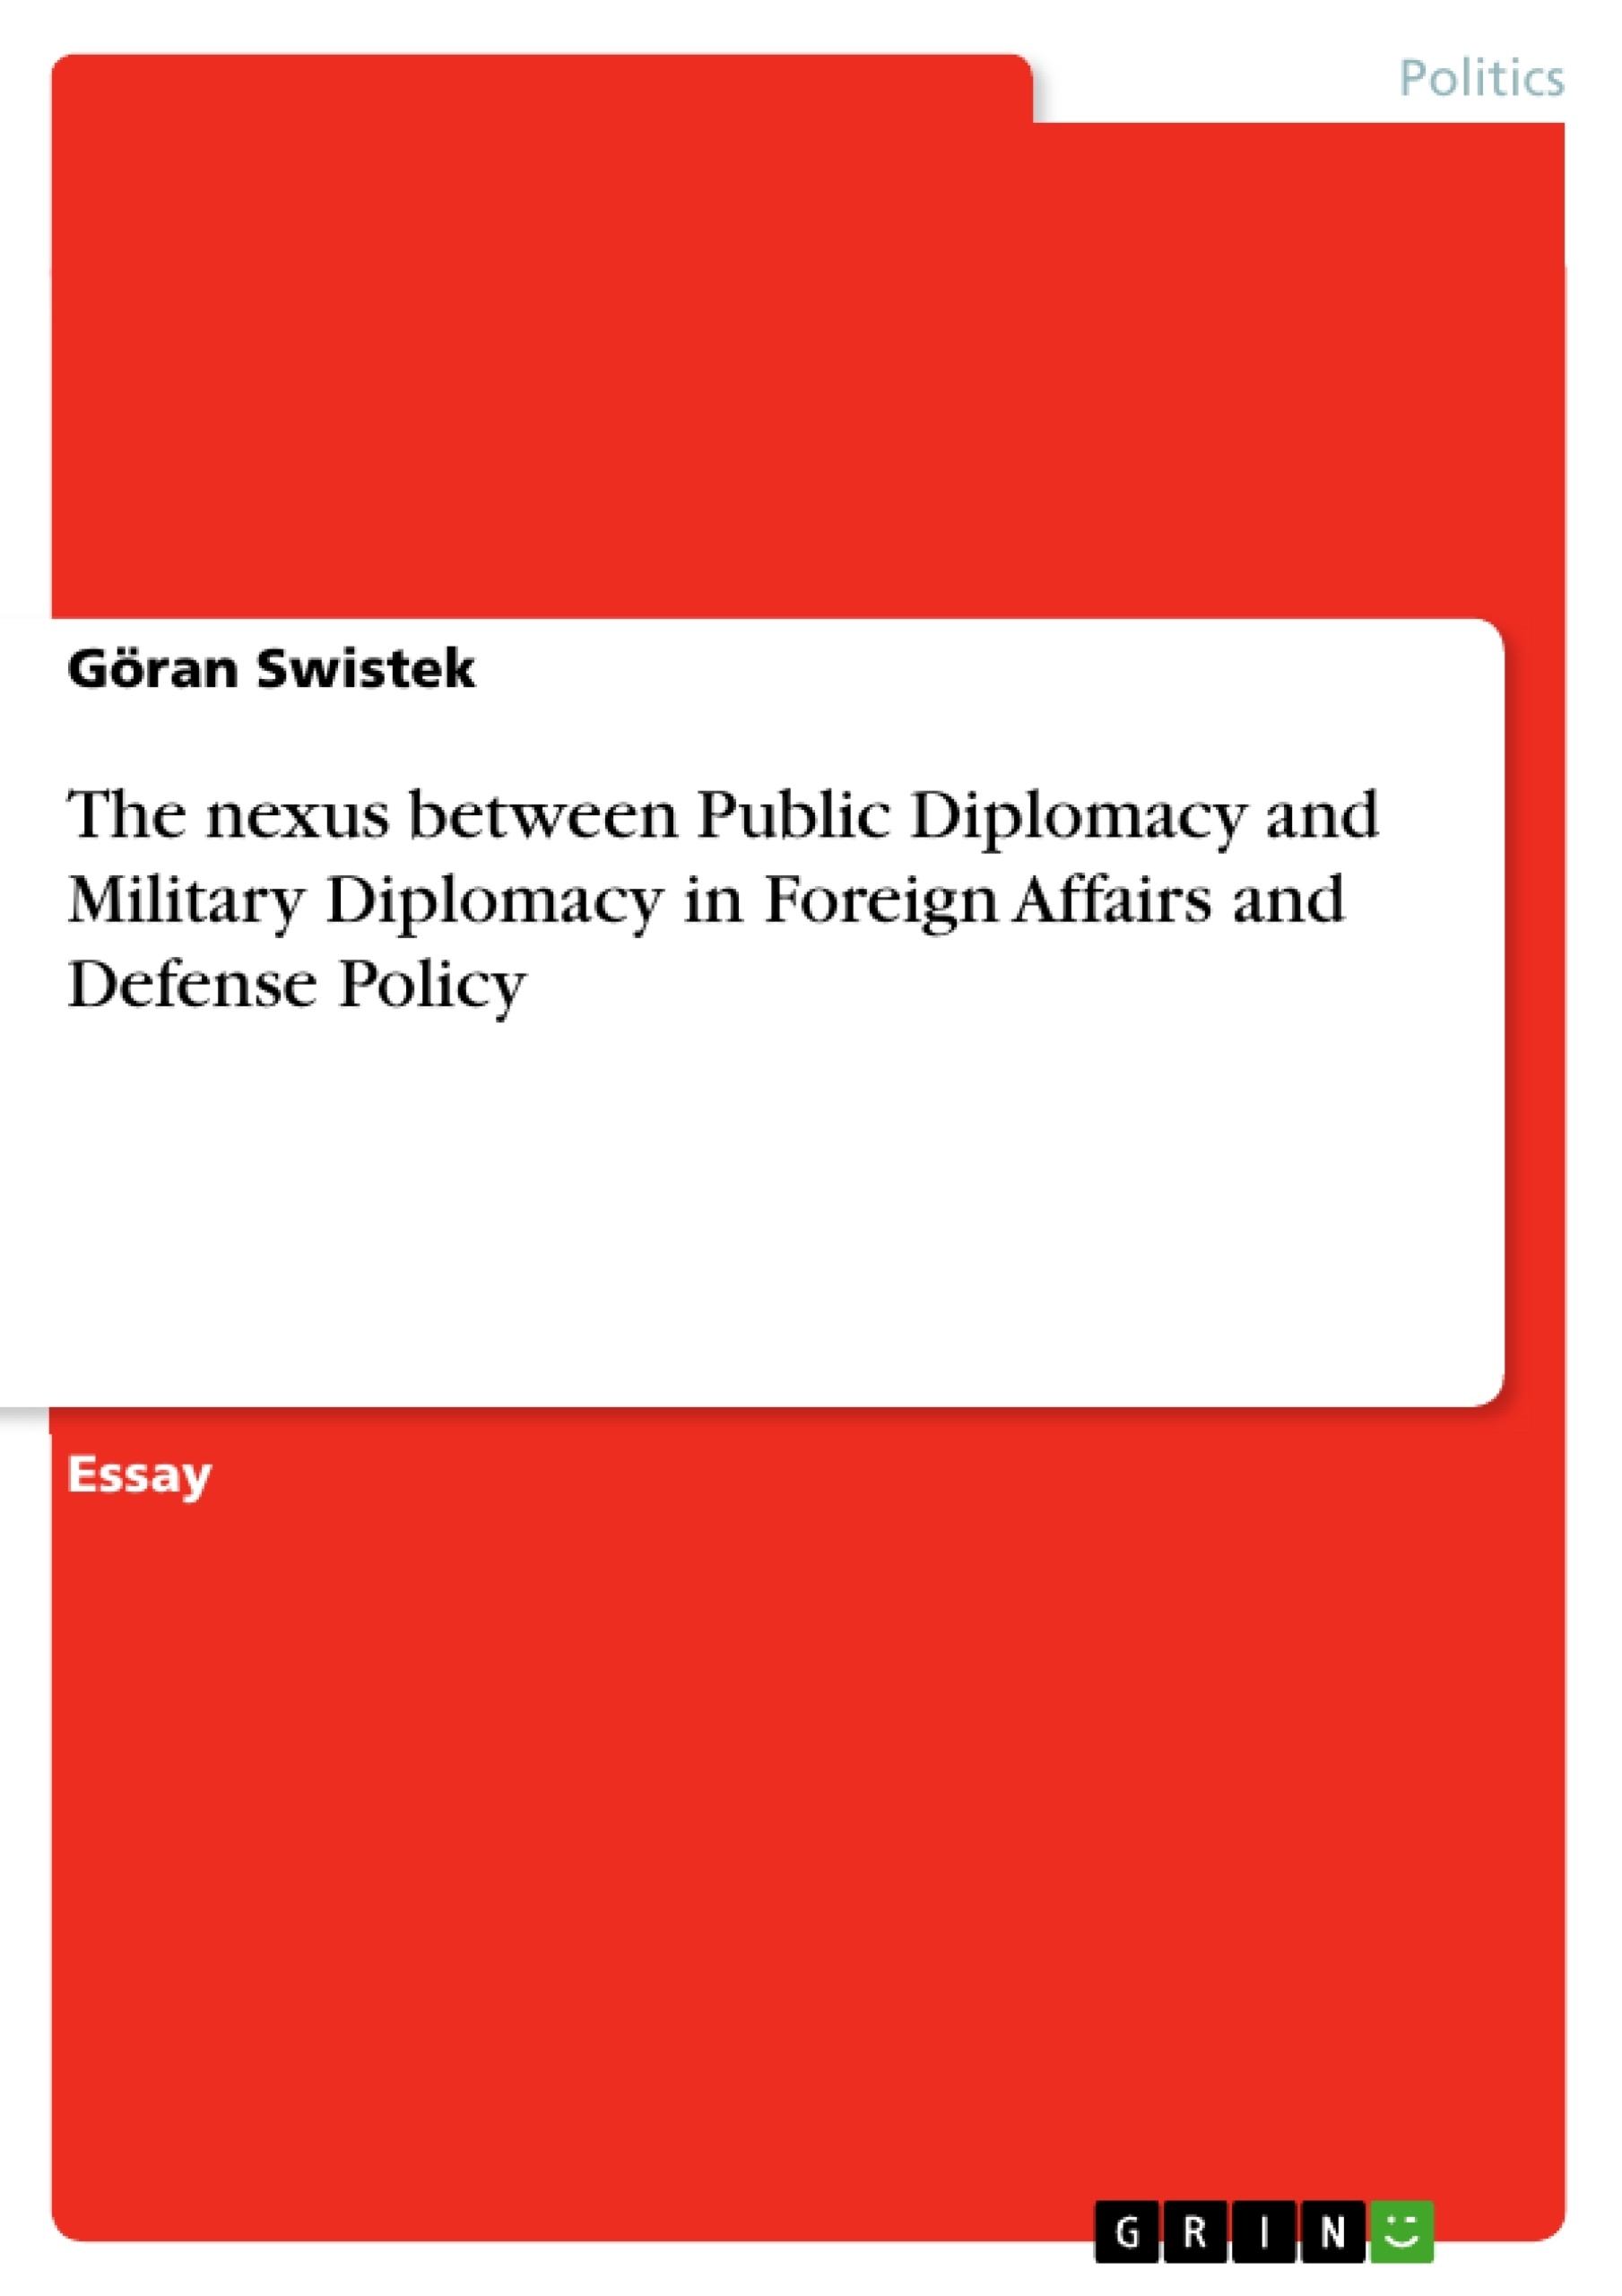 Titre: The nexus between Public Diplomacy and Military Diplomacy in Foreign Affairs and Defense Policy